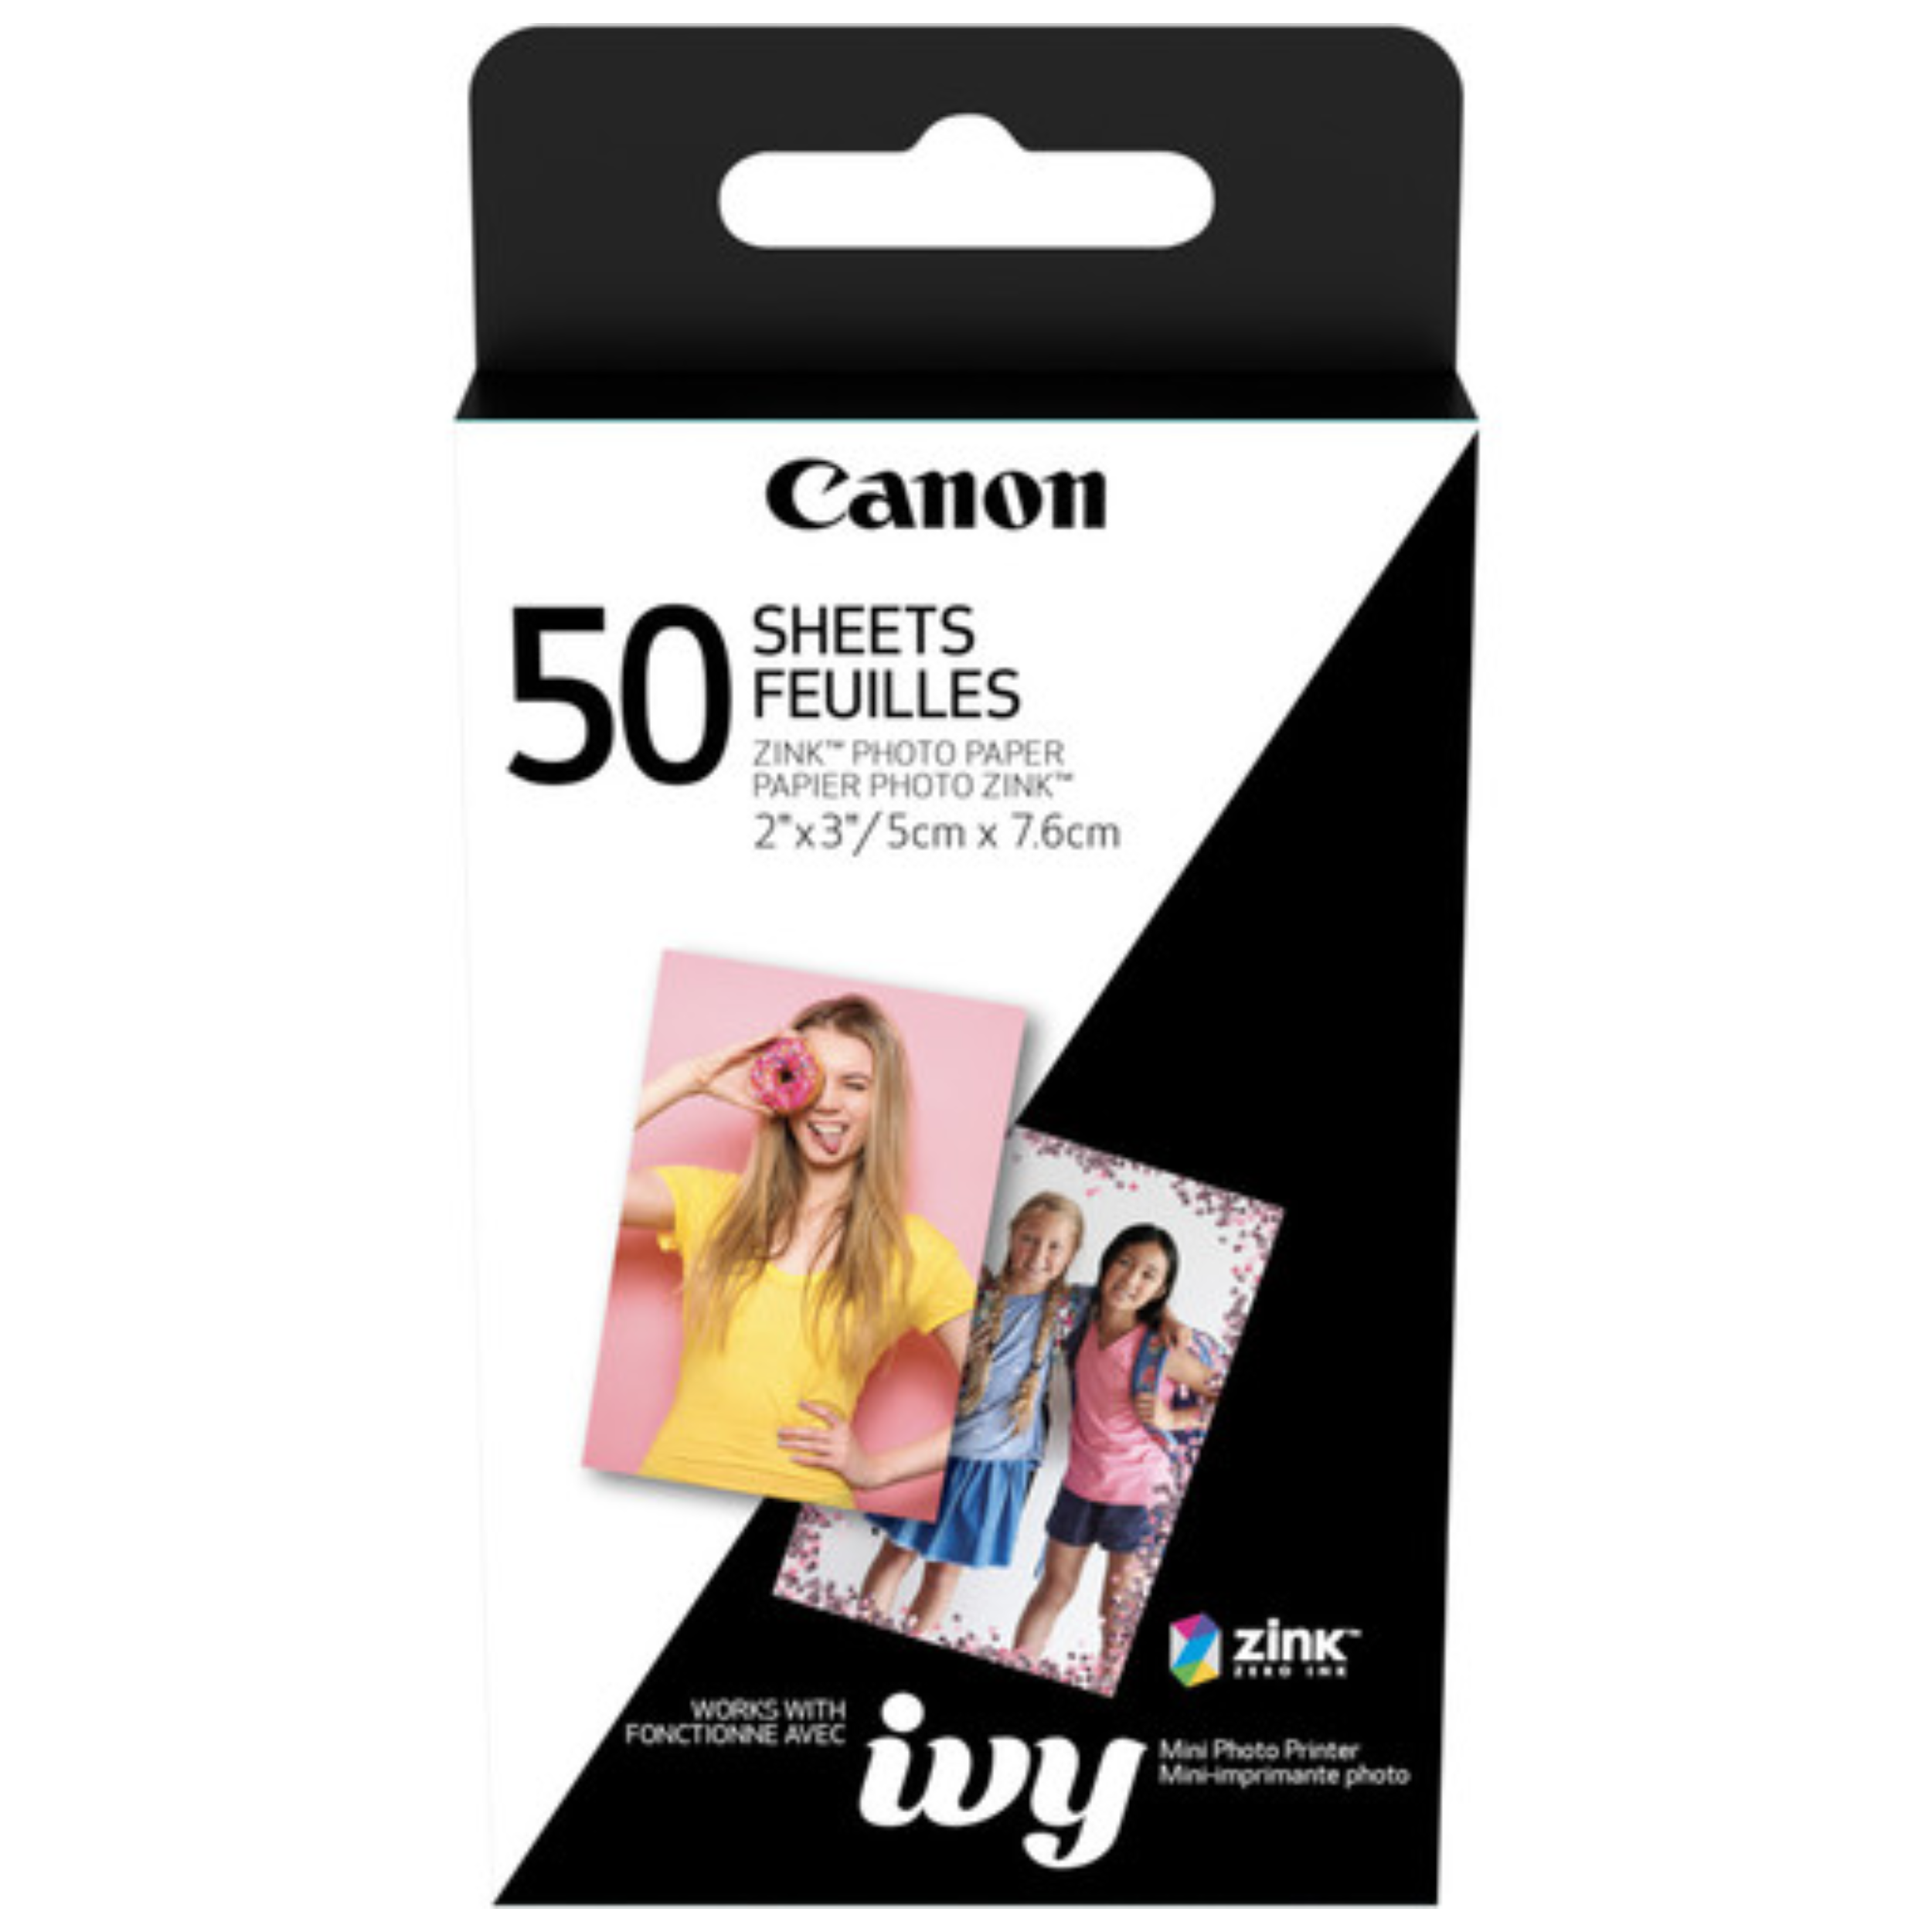 Canon 3215C001 2 x 3" ZINK Photo Paper Pack for IVY printer  (50 Sheets)